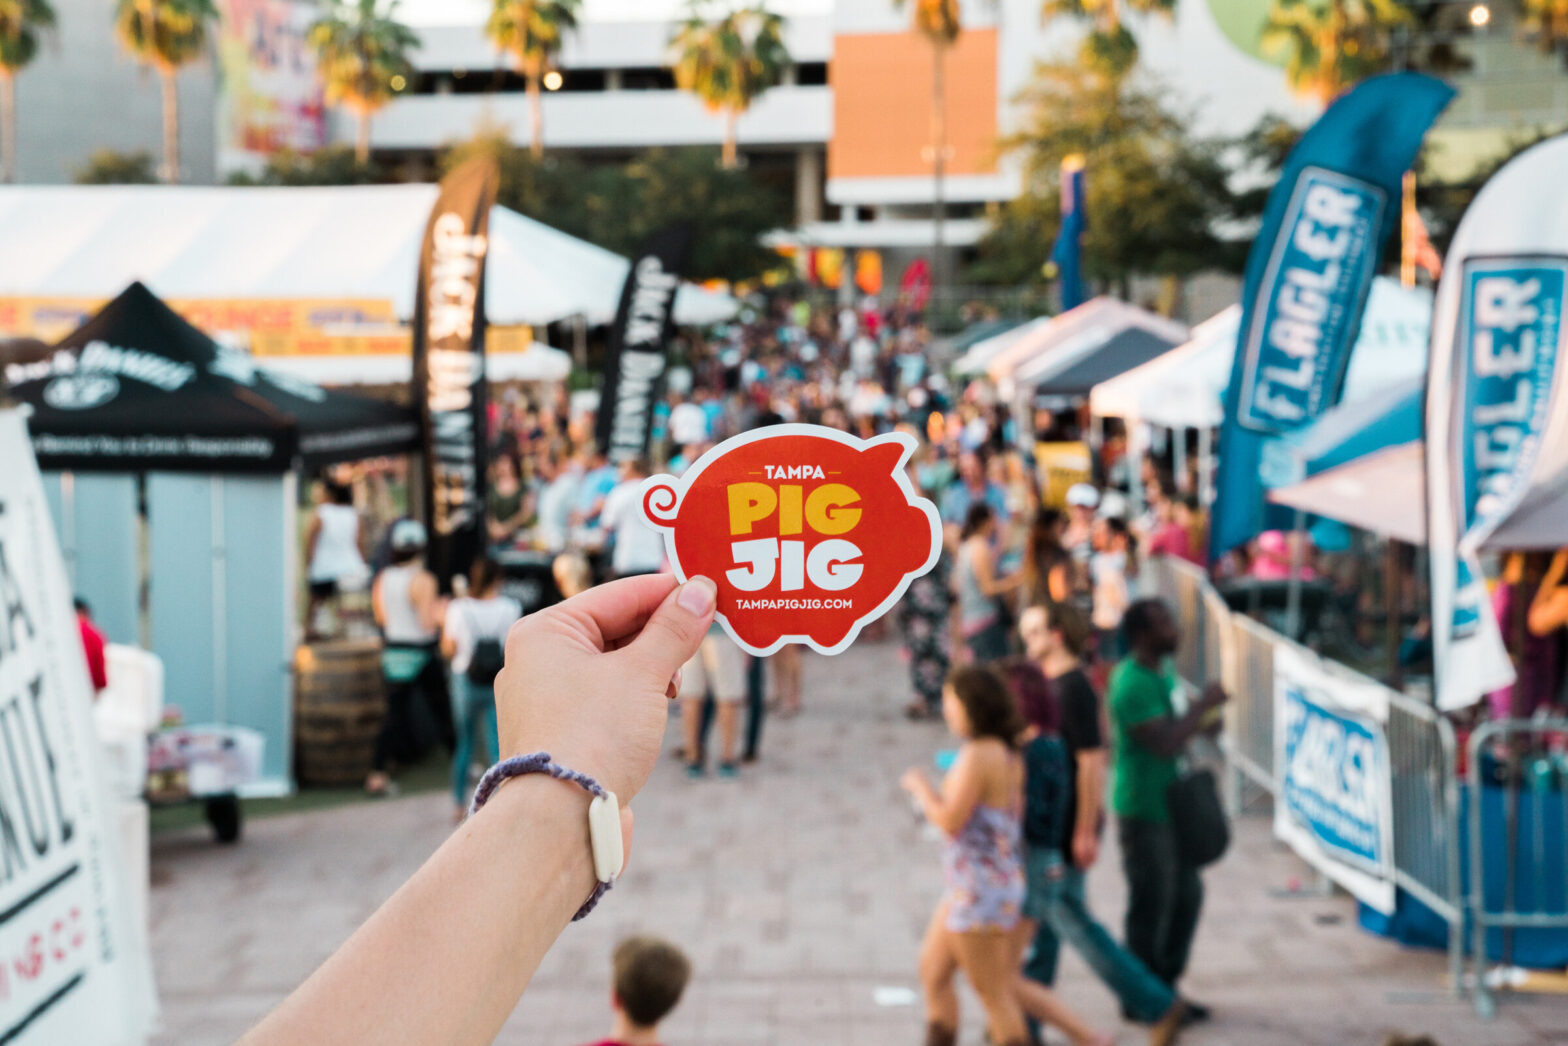 The Tampa Pig Jig is on the horizon, ready to raise more money and serve up more barbecue